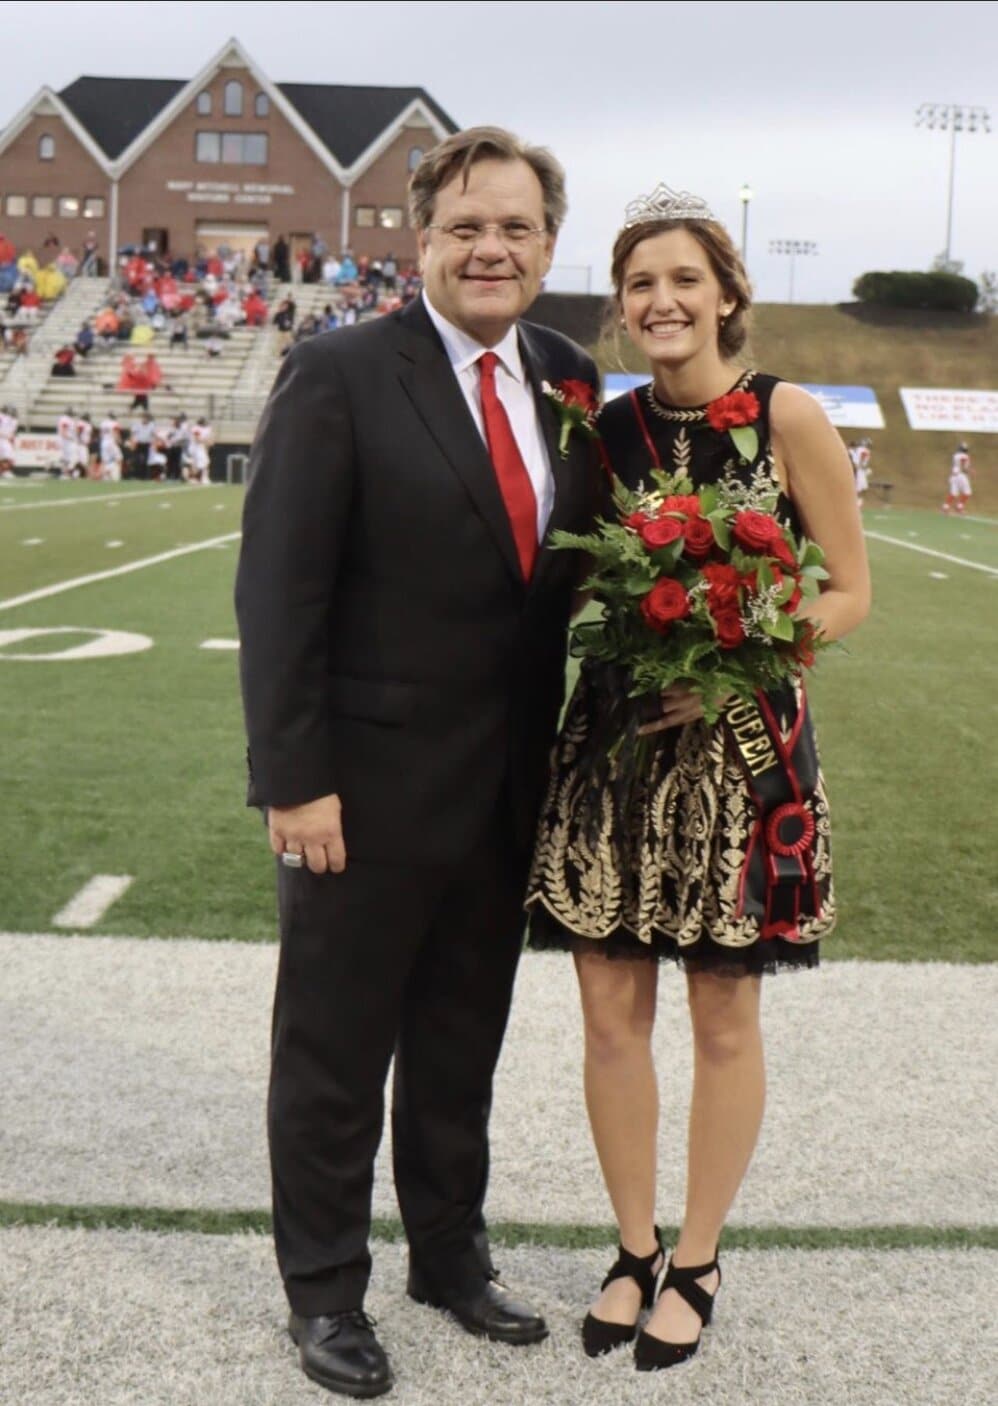 President Gene Fant and Homecoming Queen Abbey BlackwoodPhoto courtesy the North Greenville Instagram page, @northgreenvilleuniversity.